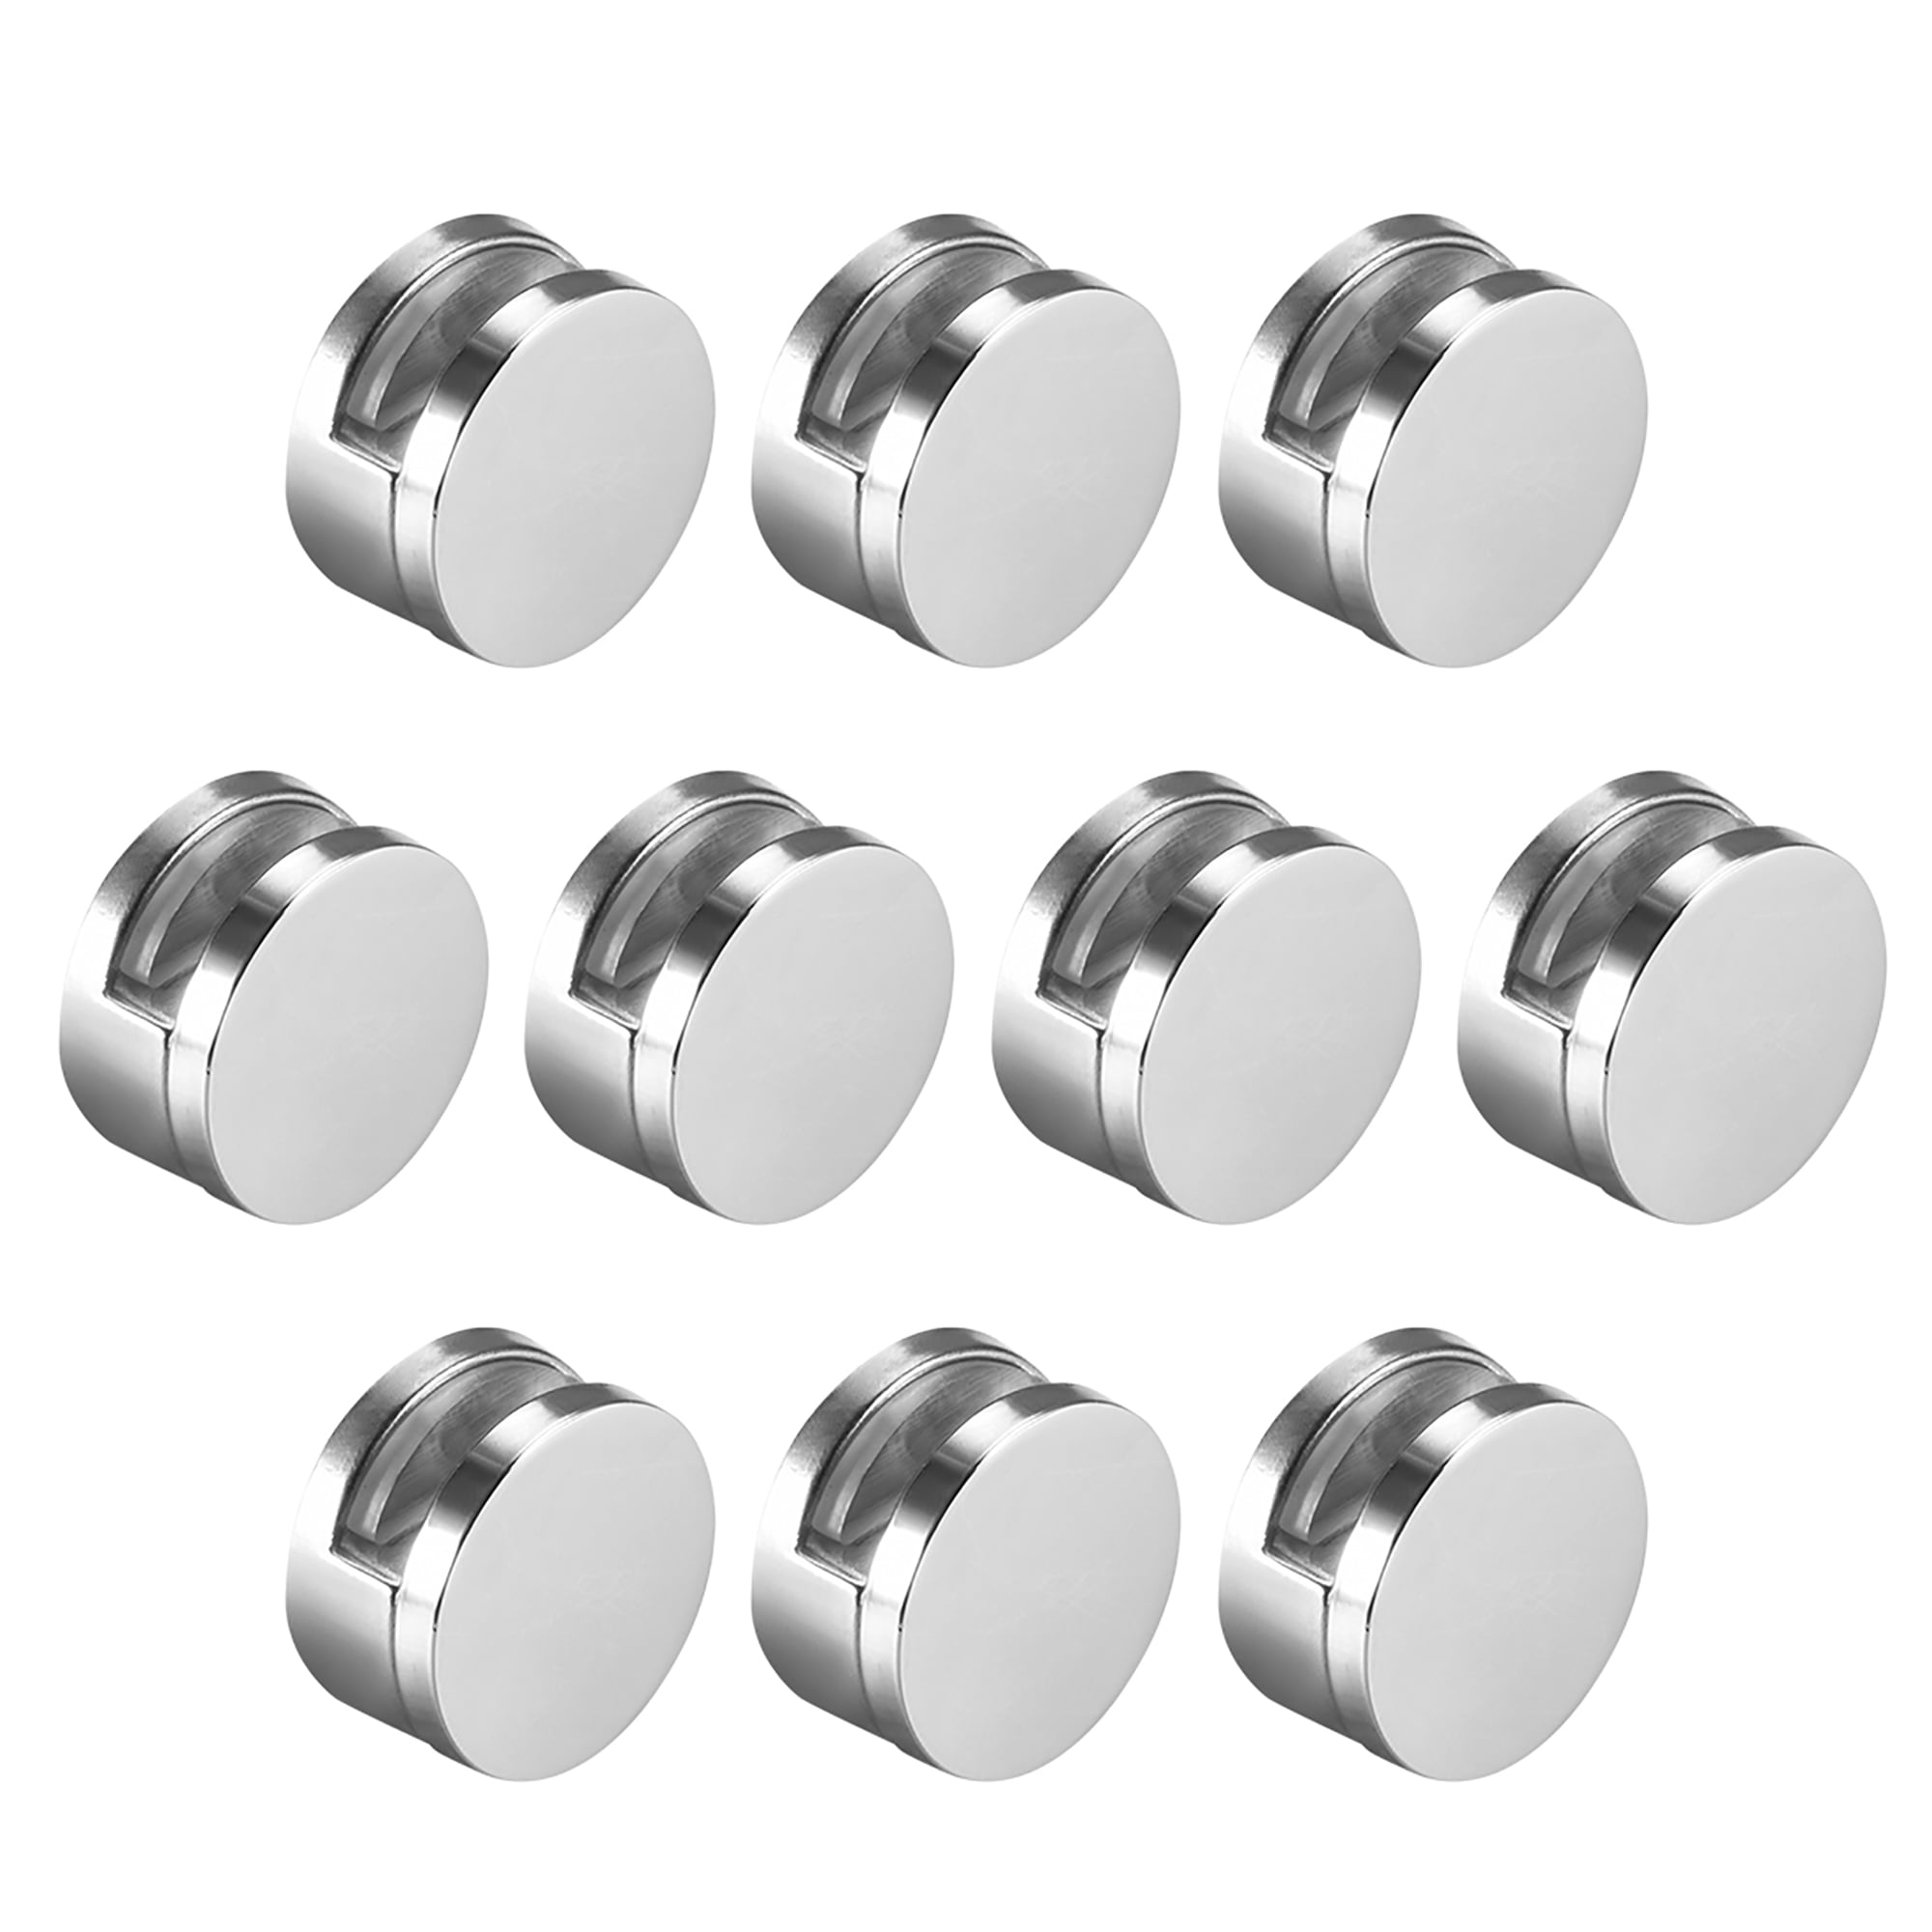 6 x MIRROR CLIPS FIXINGS FITTINGS ROUND SILVER NICKEL PLATED 